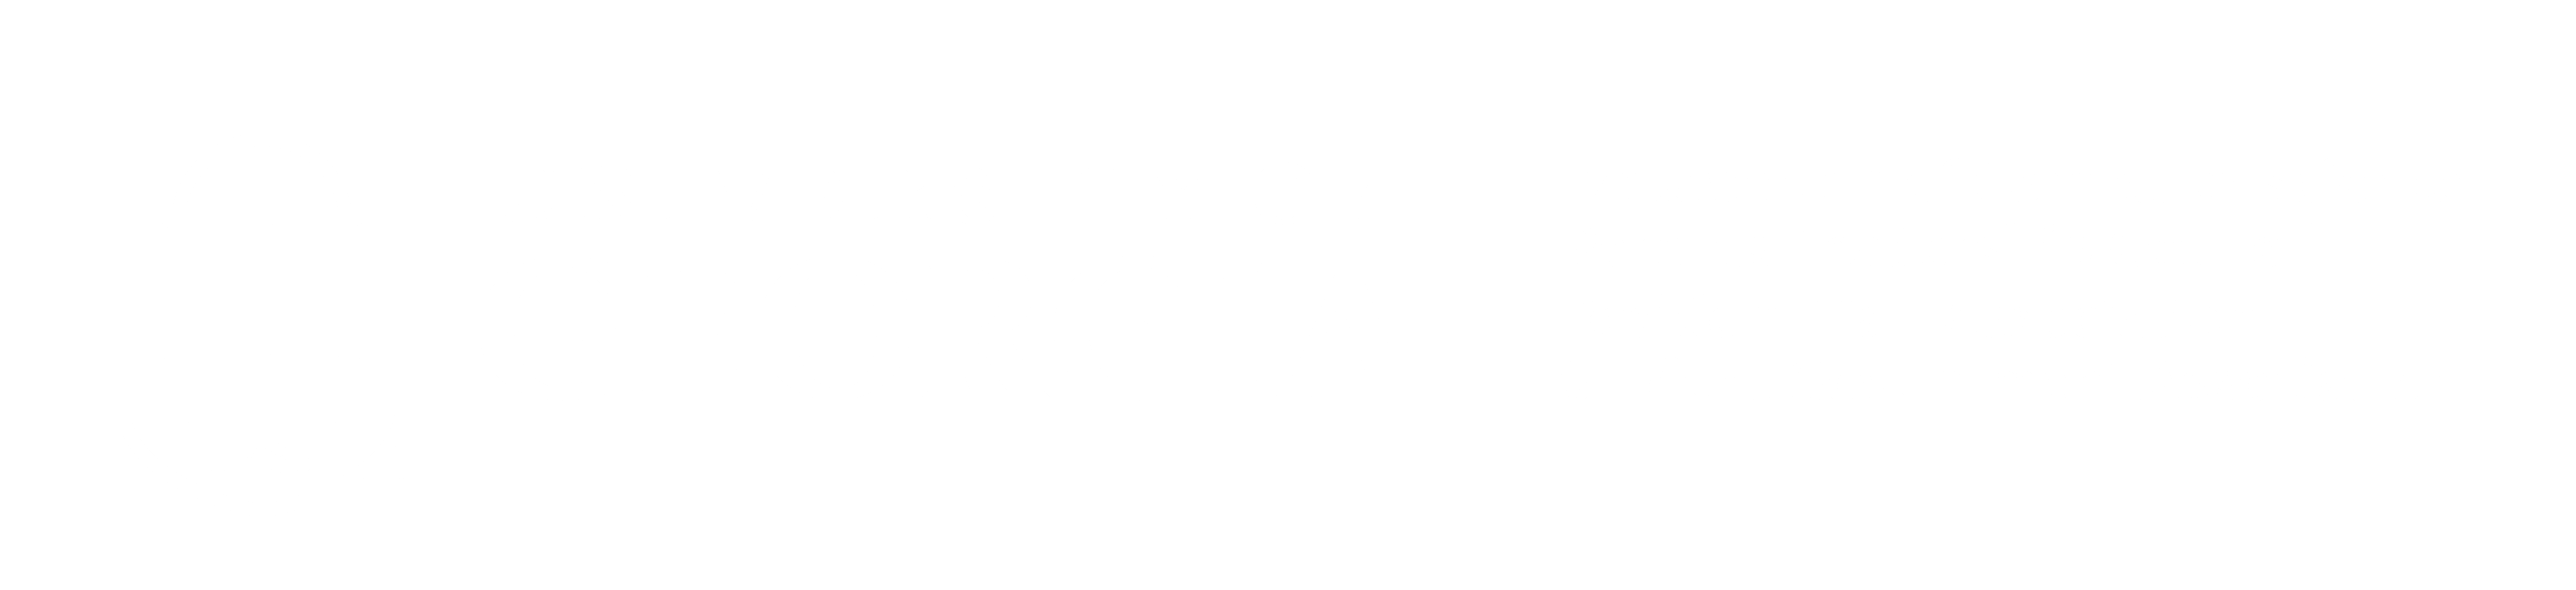 UGA Department of Computer Science, Parents Leadership Council, Resident Hall Association, Student Government Association